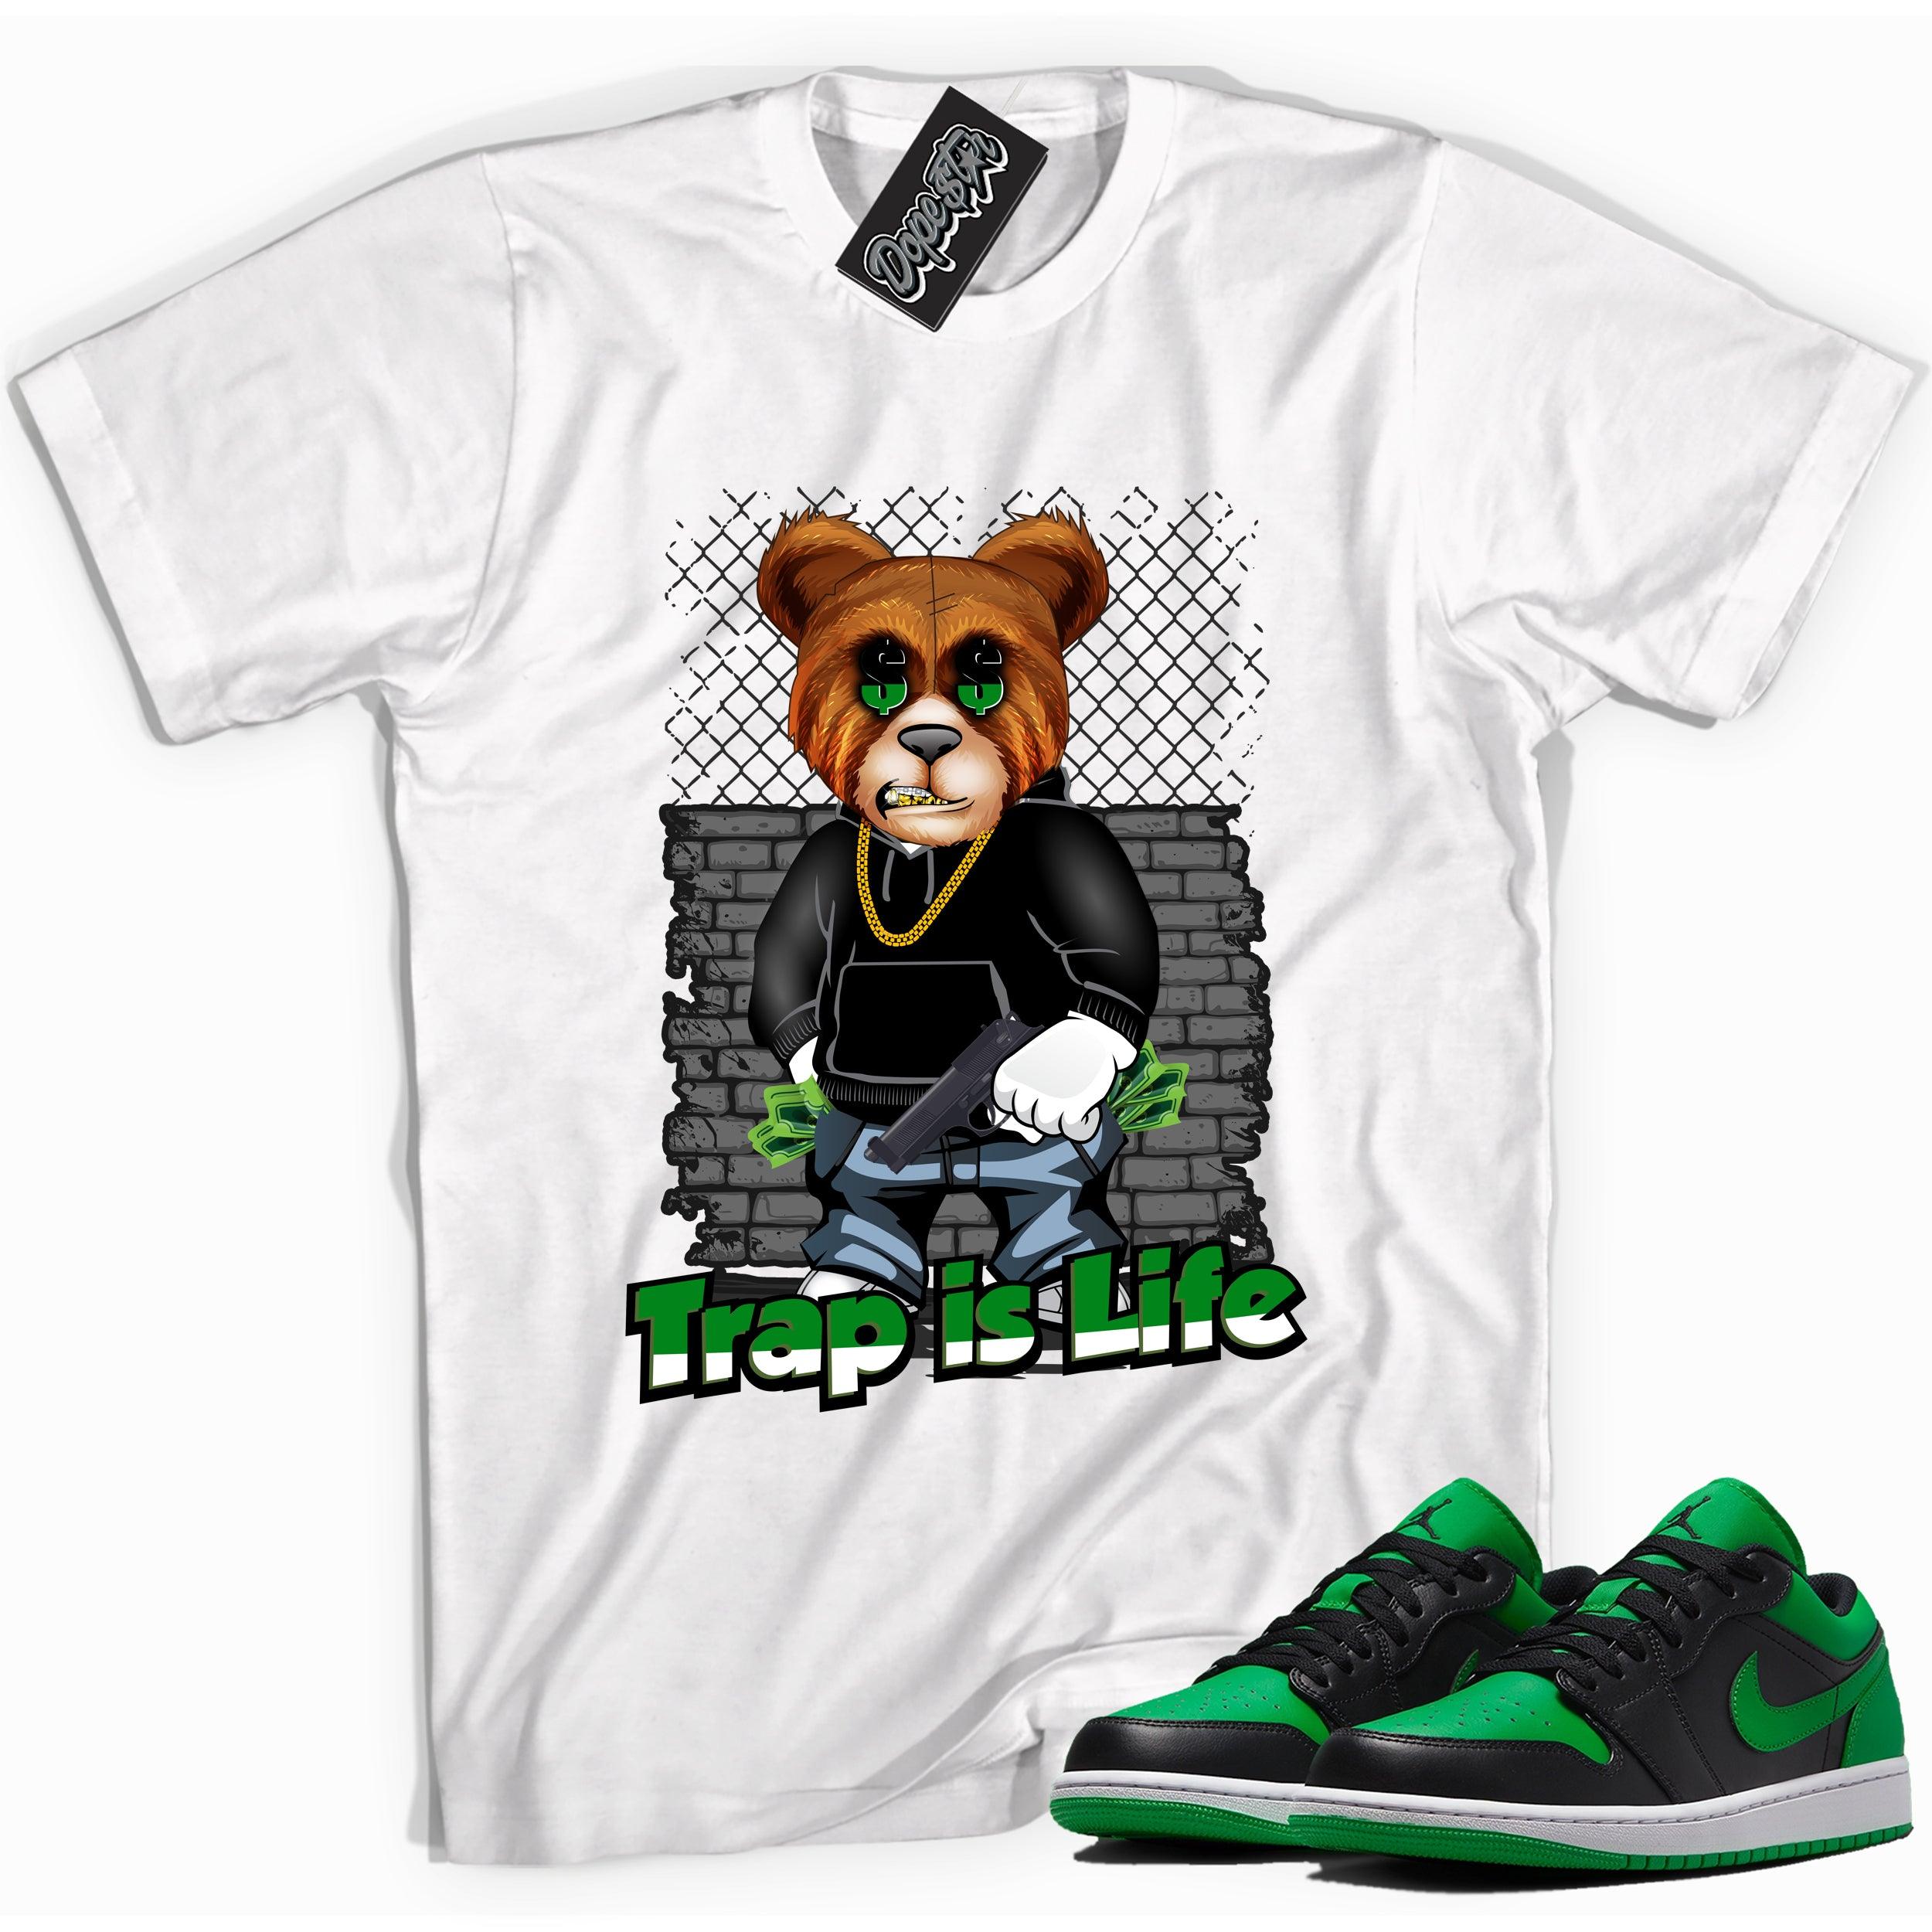 Cool white graphic tee with 'trap is life' print, that perfectly matches Air Jordan 1 Low Lucky Green sneakers